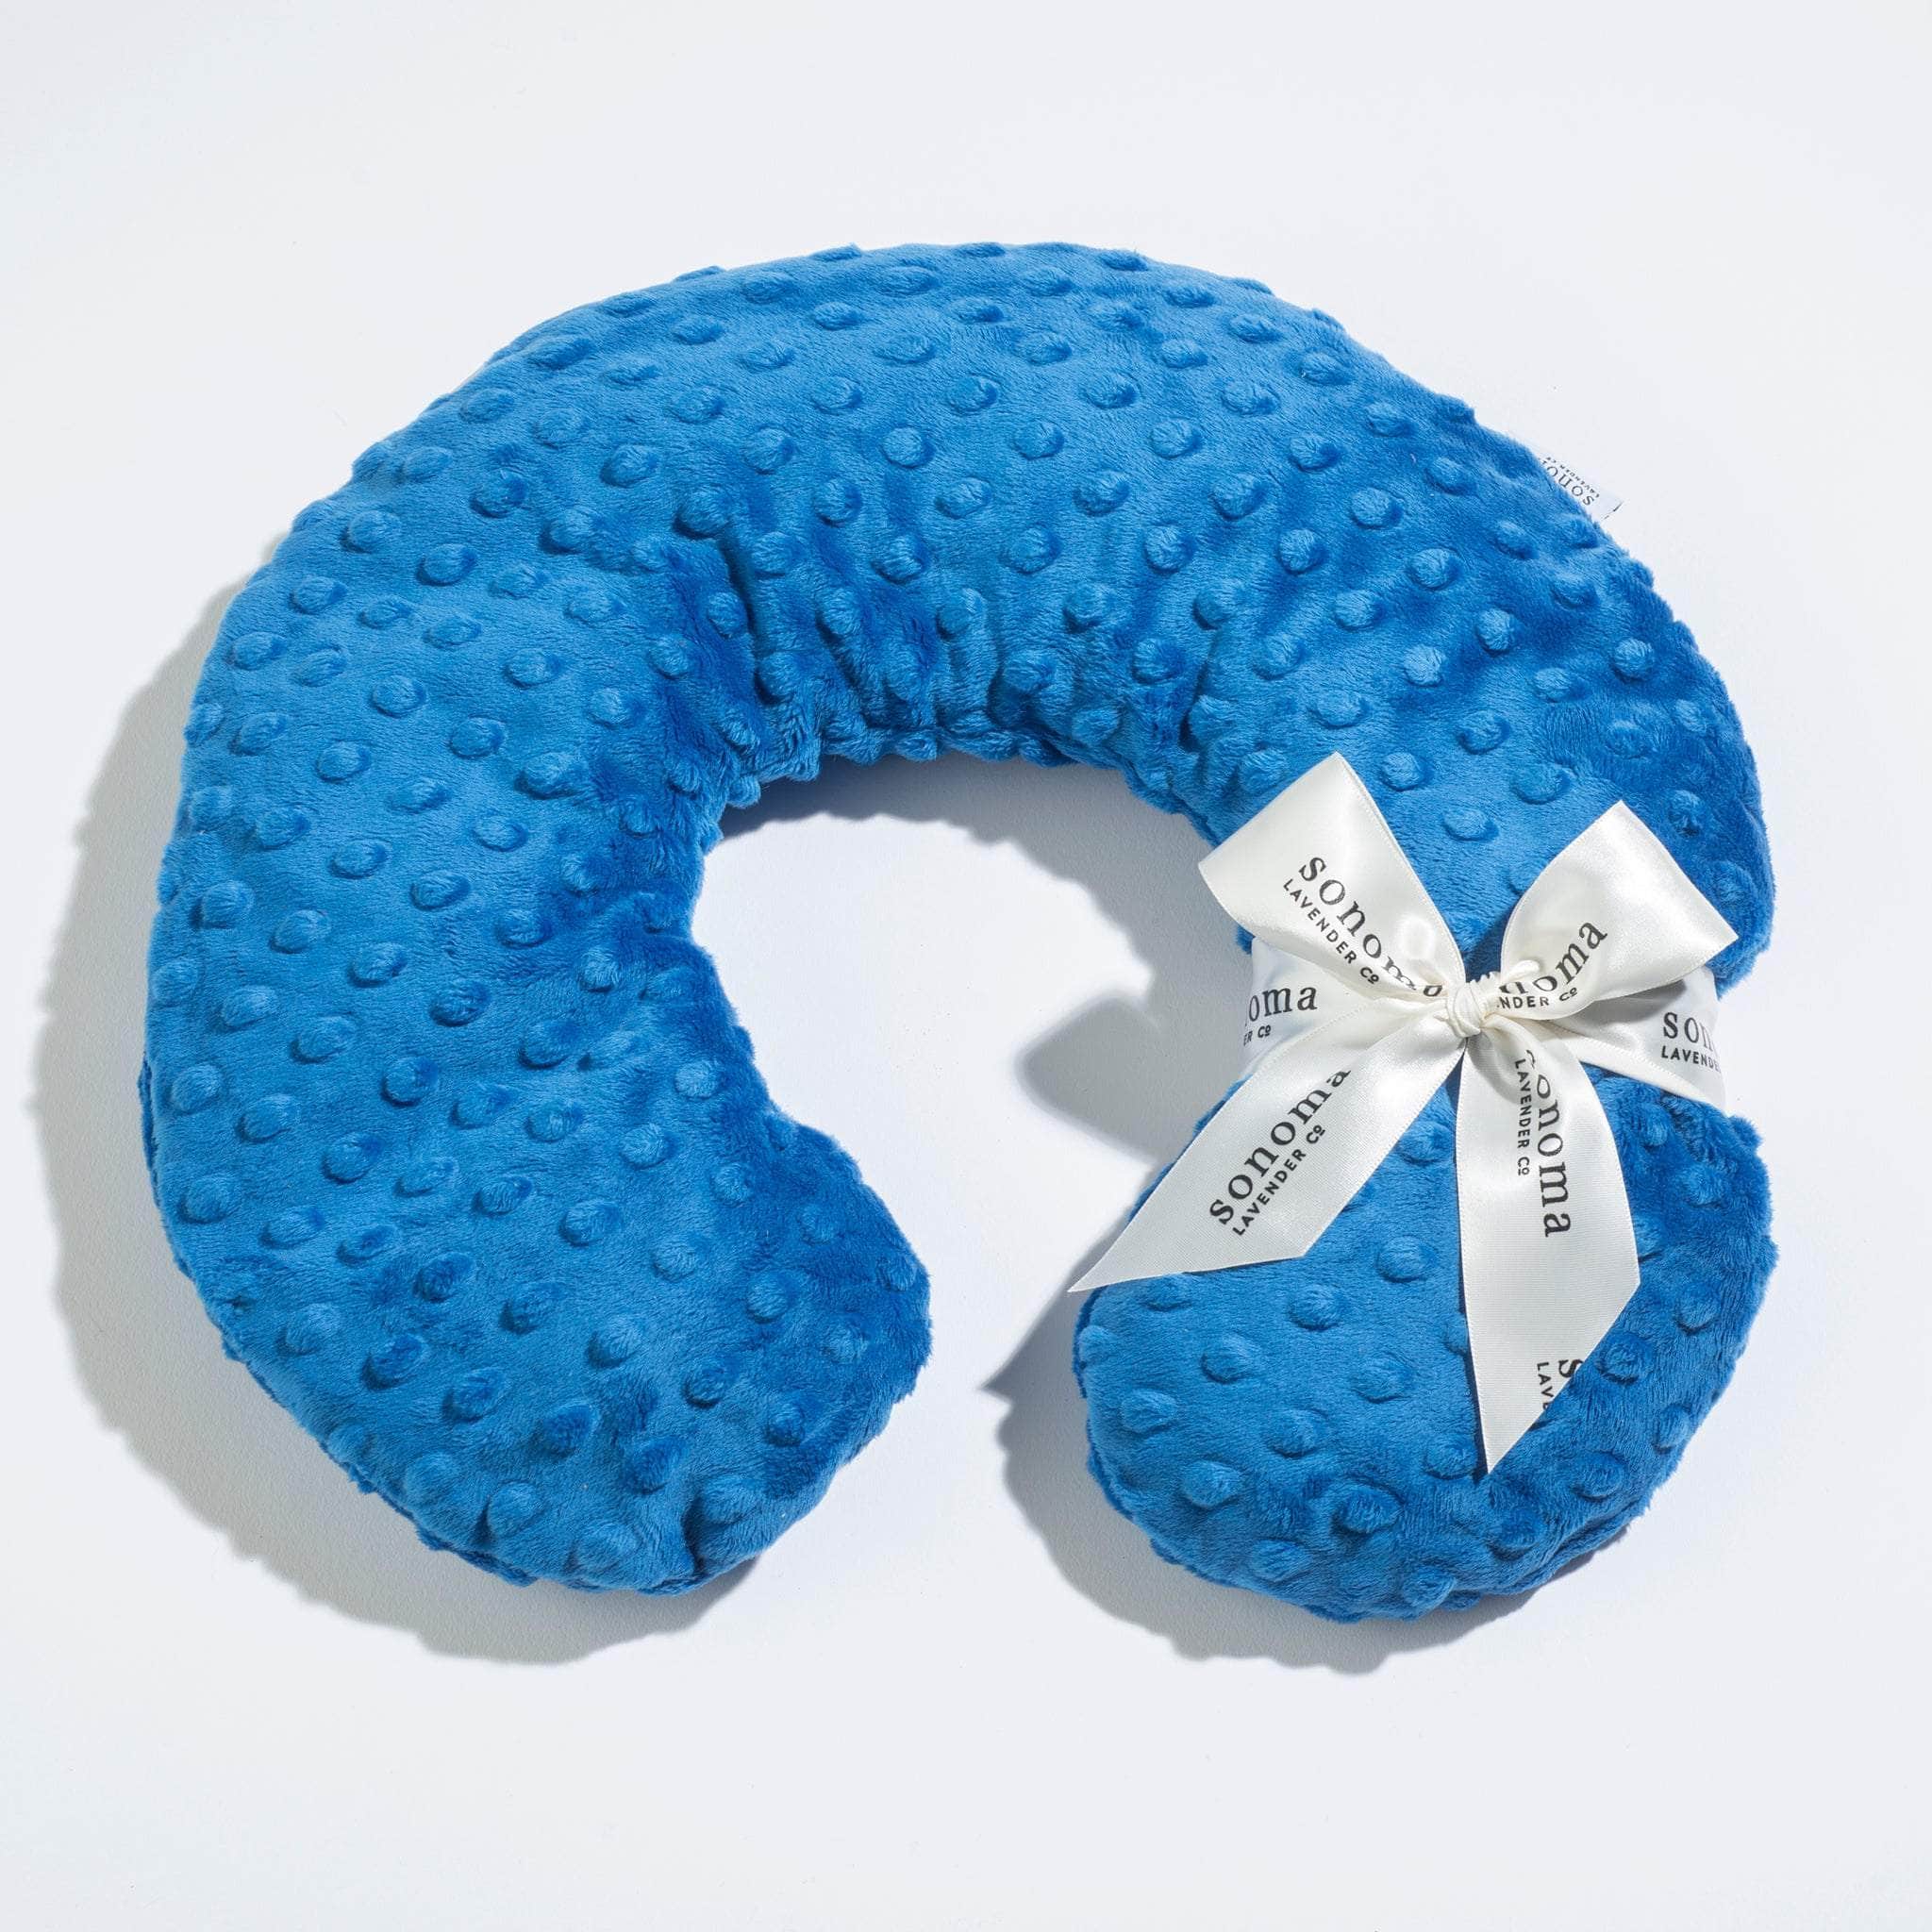 Ocean Aire Scent - Spa Neck Pillow in Ocean Blue Fabric